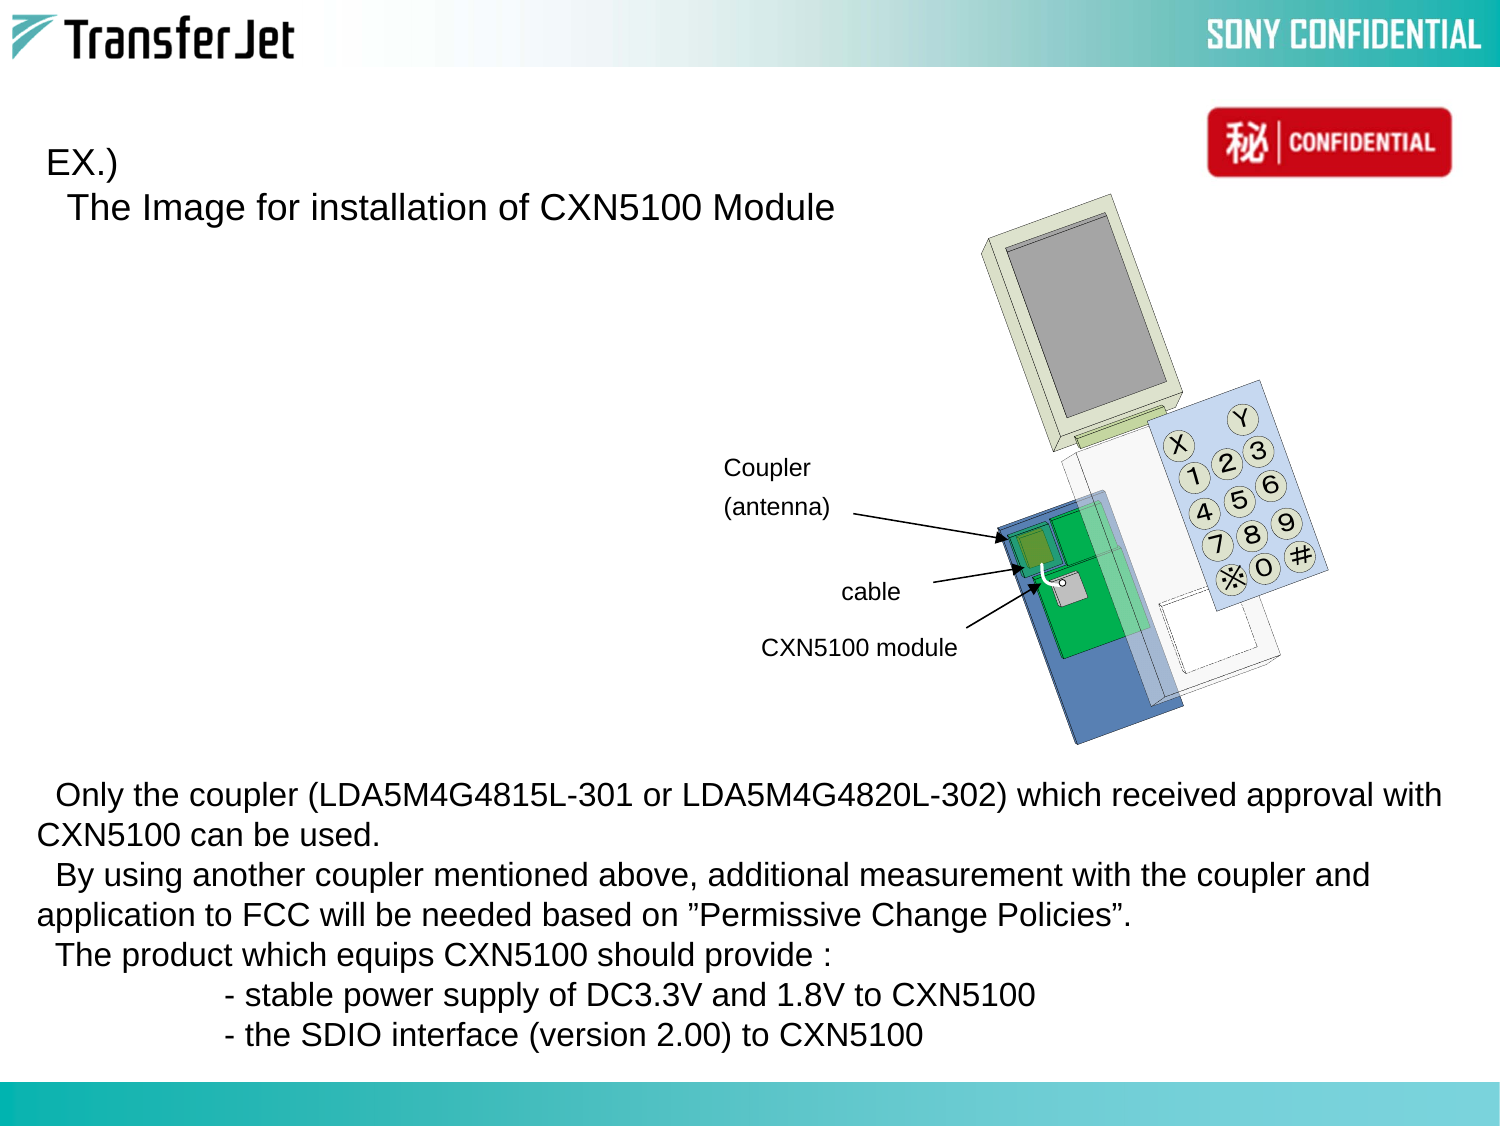 EX.)The Image for installation of CXN5100 ModuleCXN5100 moduleCoupler(antenna)cableOnly the coupler (LDA5M4G4815L-301 or LDA5M4G4820L-302) which received approval with CXN5100 can be used. By using another coupler mentioned above, additional measurement with the coupler and application to FCC will be needed based on ”Permissive Change Policies”.The product which equips CXN5100 should provide :- stable power supply of DC3.3V and 1.8V to CXN5100- the SDIO interface (version 2.00) to CXN5100